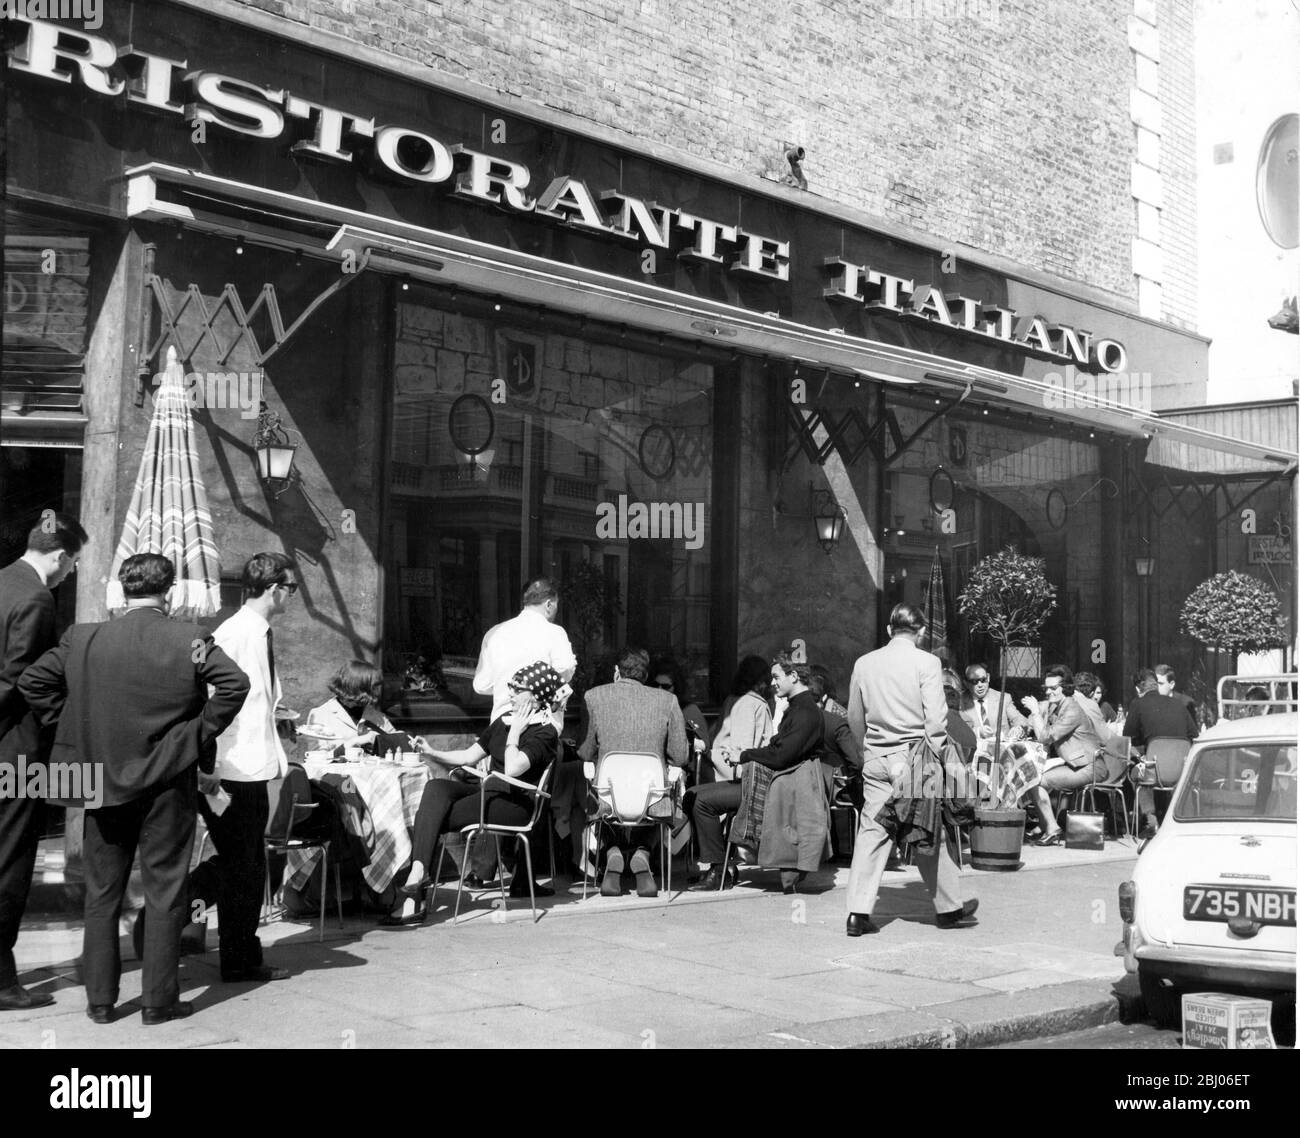 The Sidewalk cafe look in London - Bright sunshine came to London this afternoon - and some even went as far as to take their meals outside - as in this Kensington restaurant. - 11/4/64 - Stock Photo